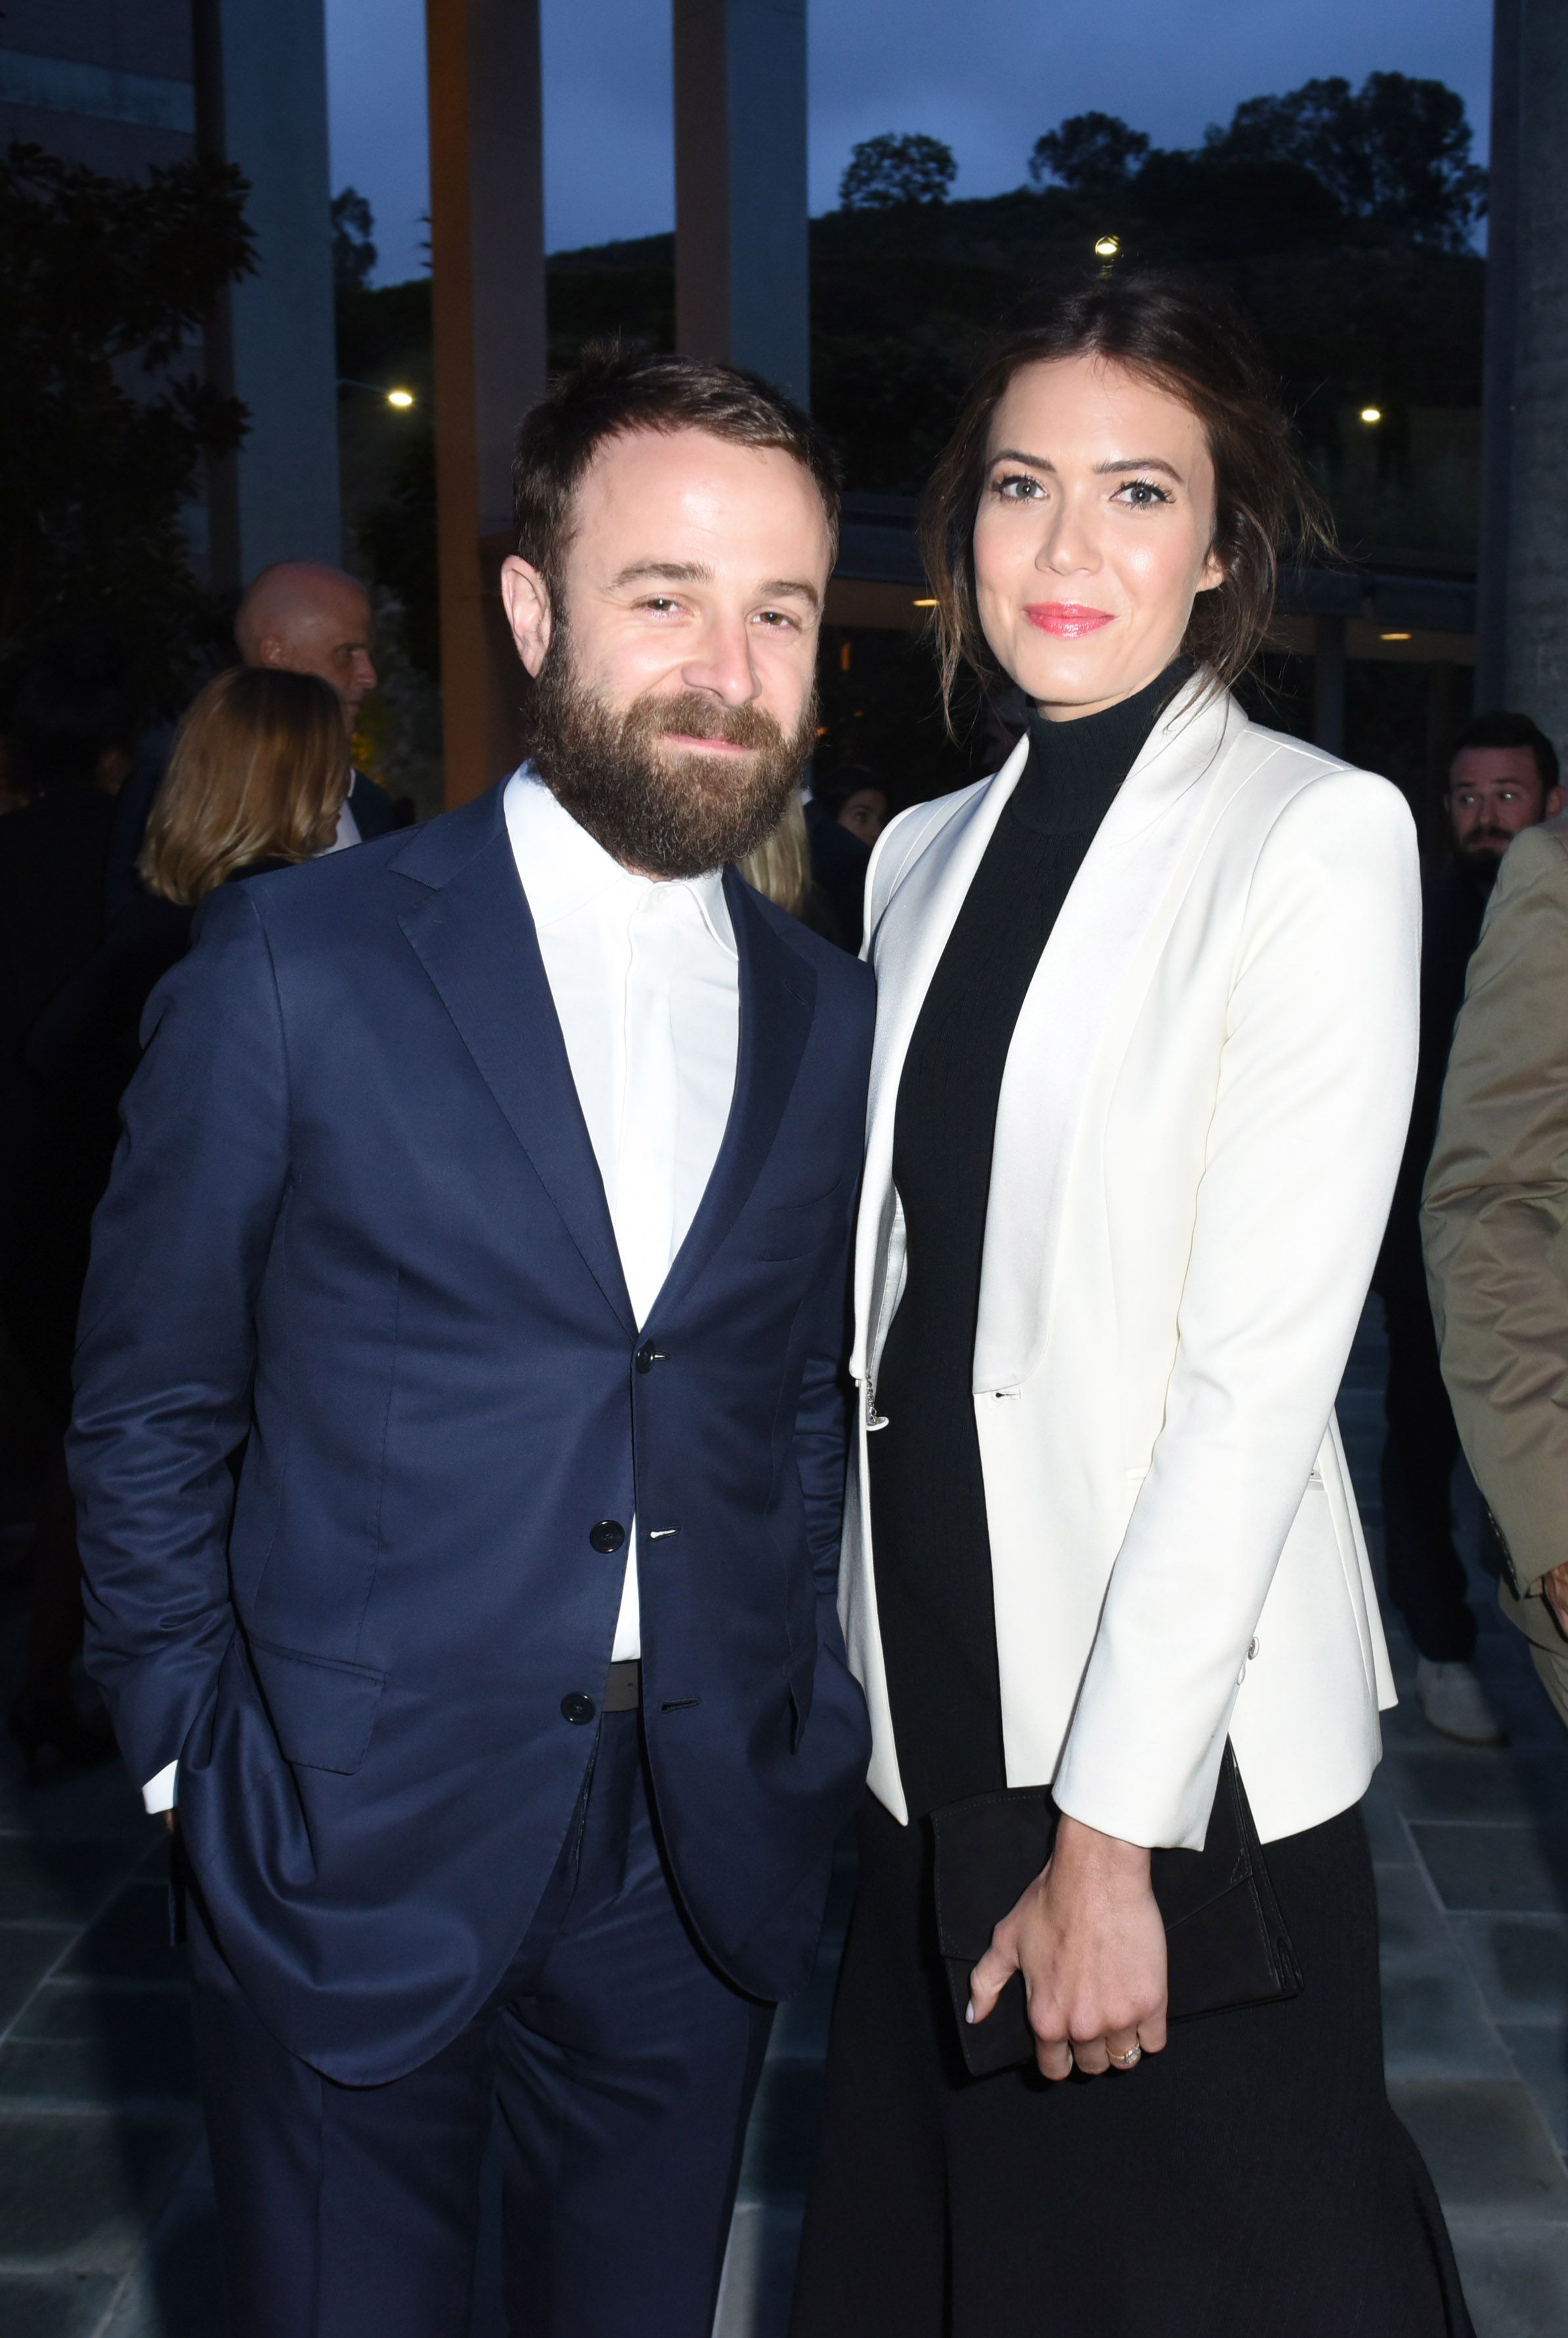 Mandy moore and taylor goldsmith